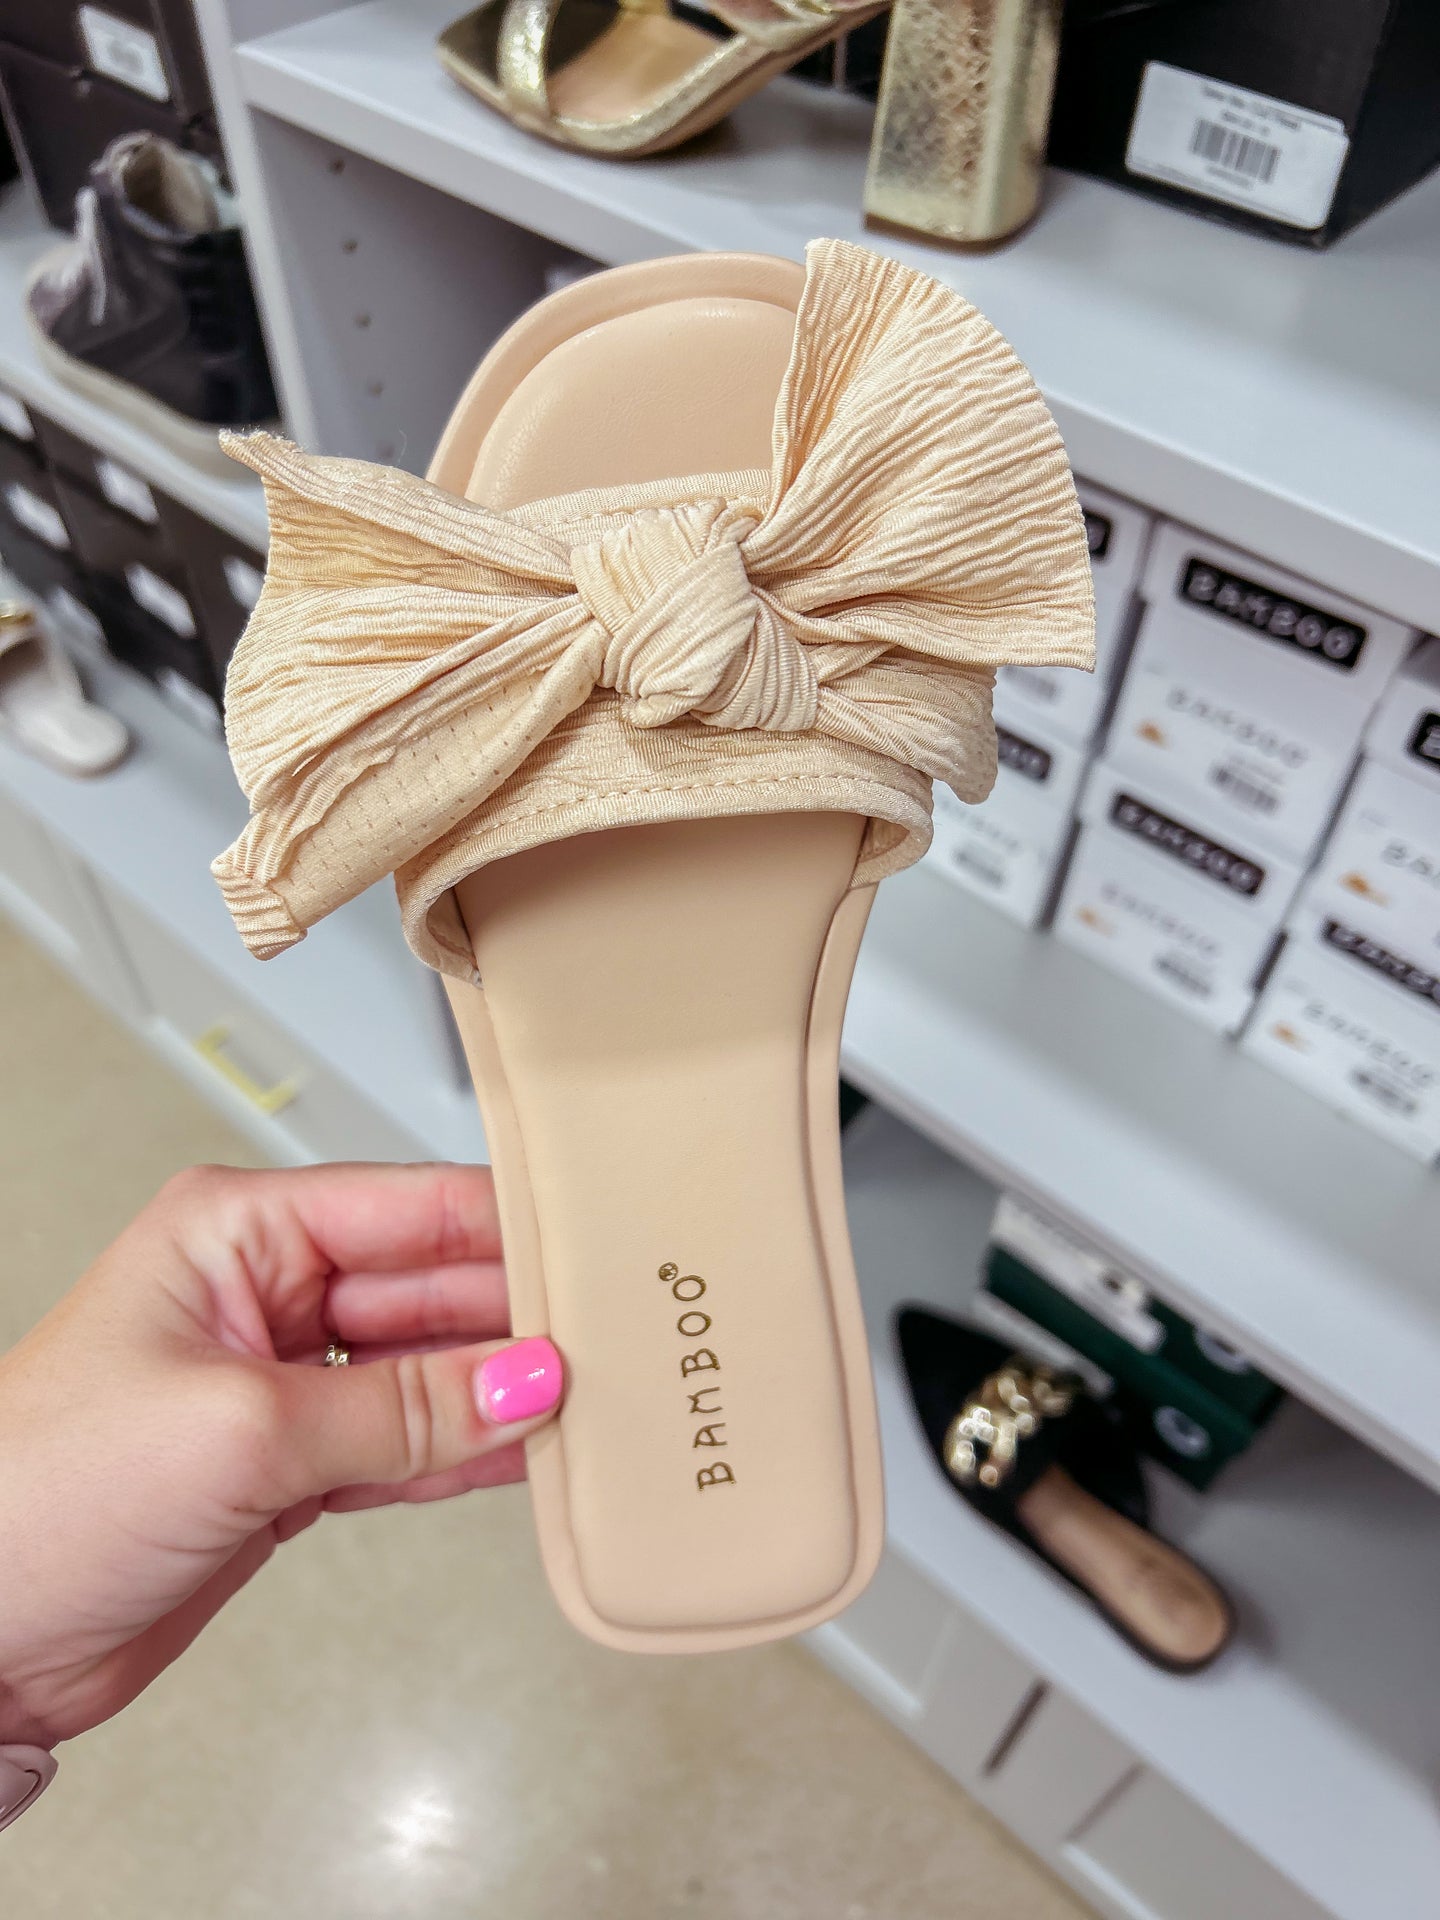 Lucy Sandal